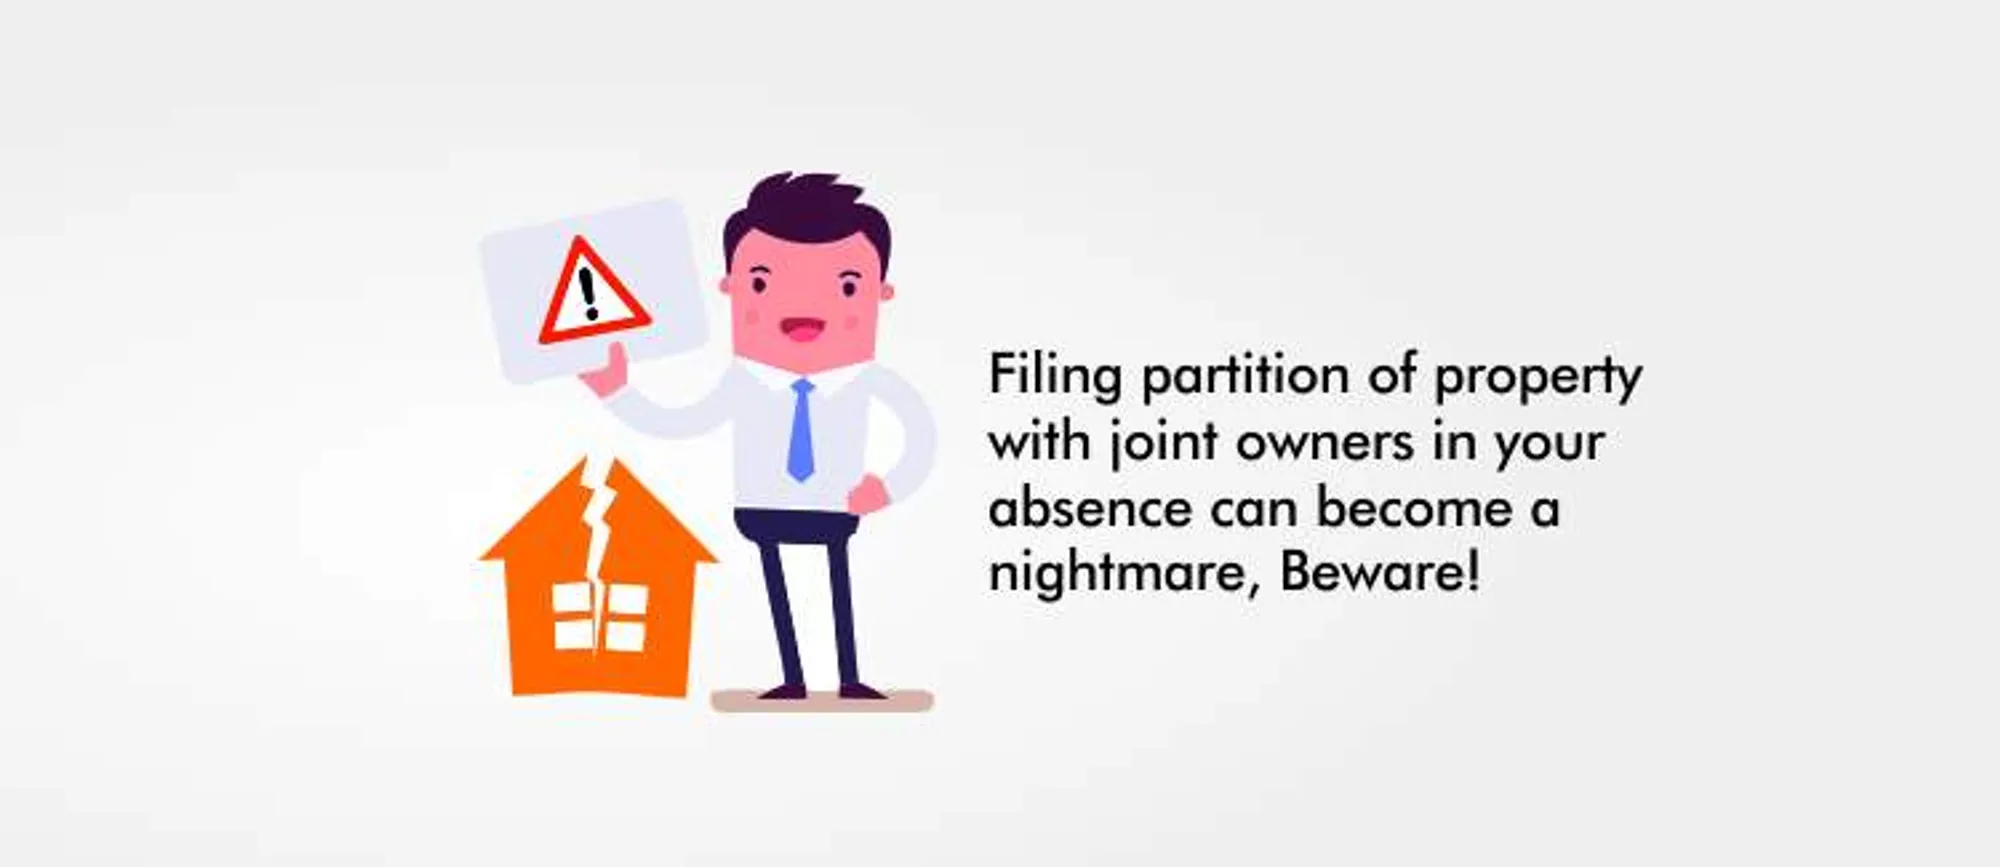 Filing partition of property with joint owners in your absence can become a nightmare, Beware!